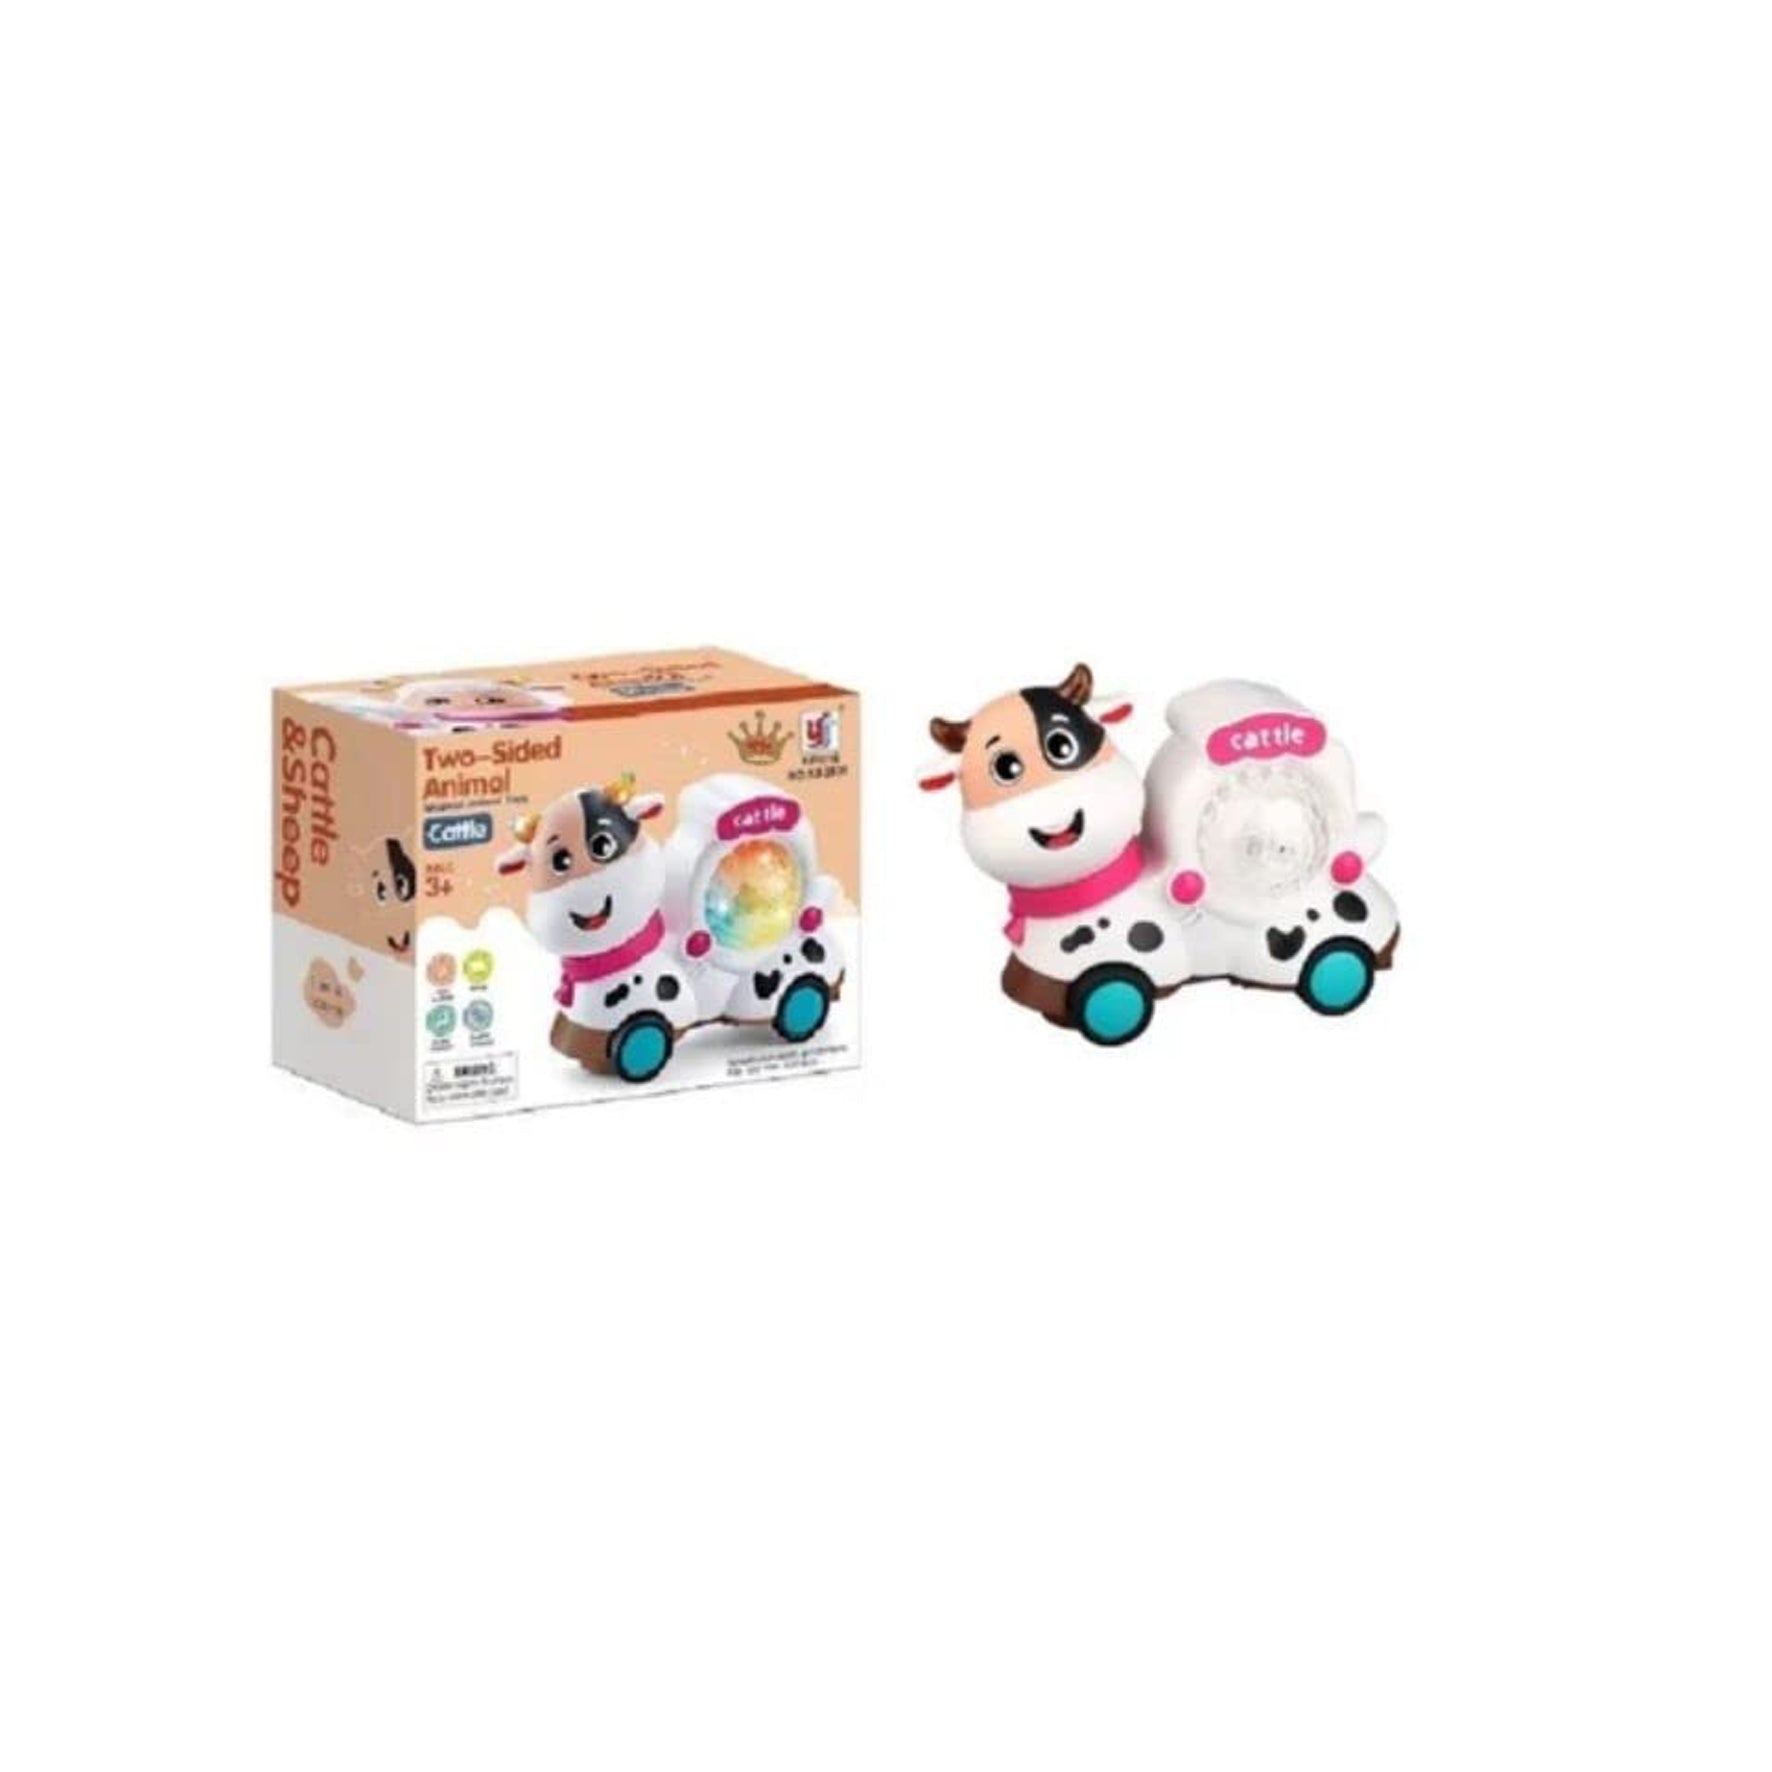 CAMITOY Two-Sided Animal Toy | Musical Dancing | Electric Toys with Sound | 3D Flashing Lights | Cattle and Sheep